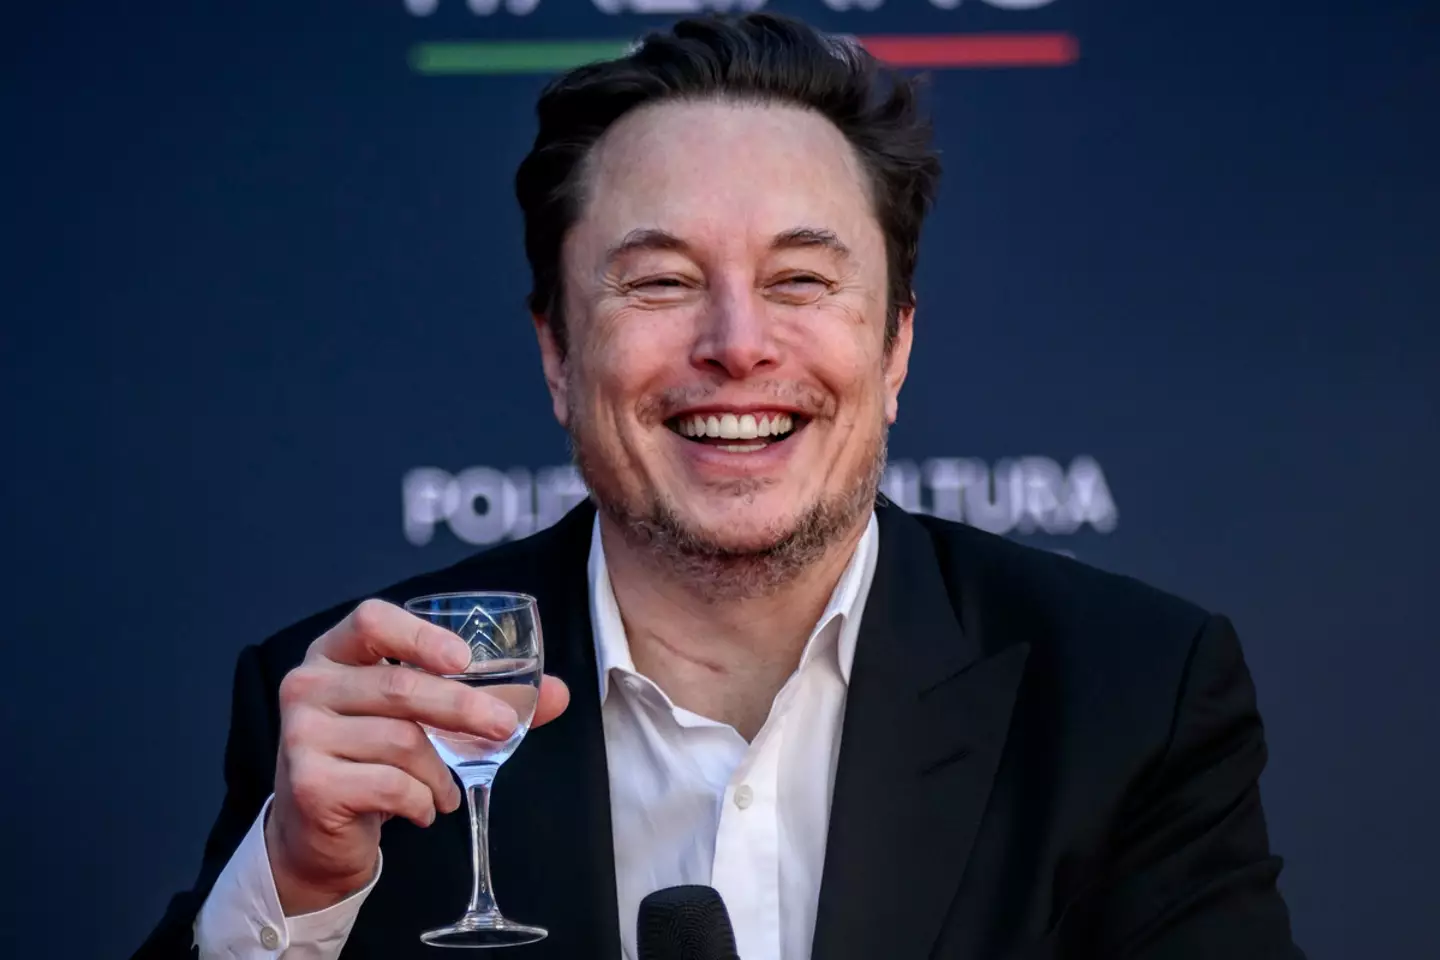 Musk said the patient was 'recovering well'.